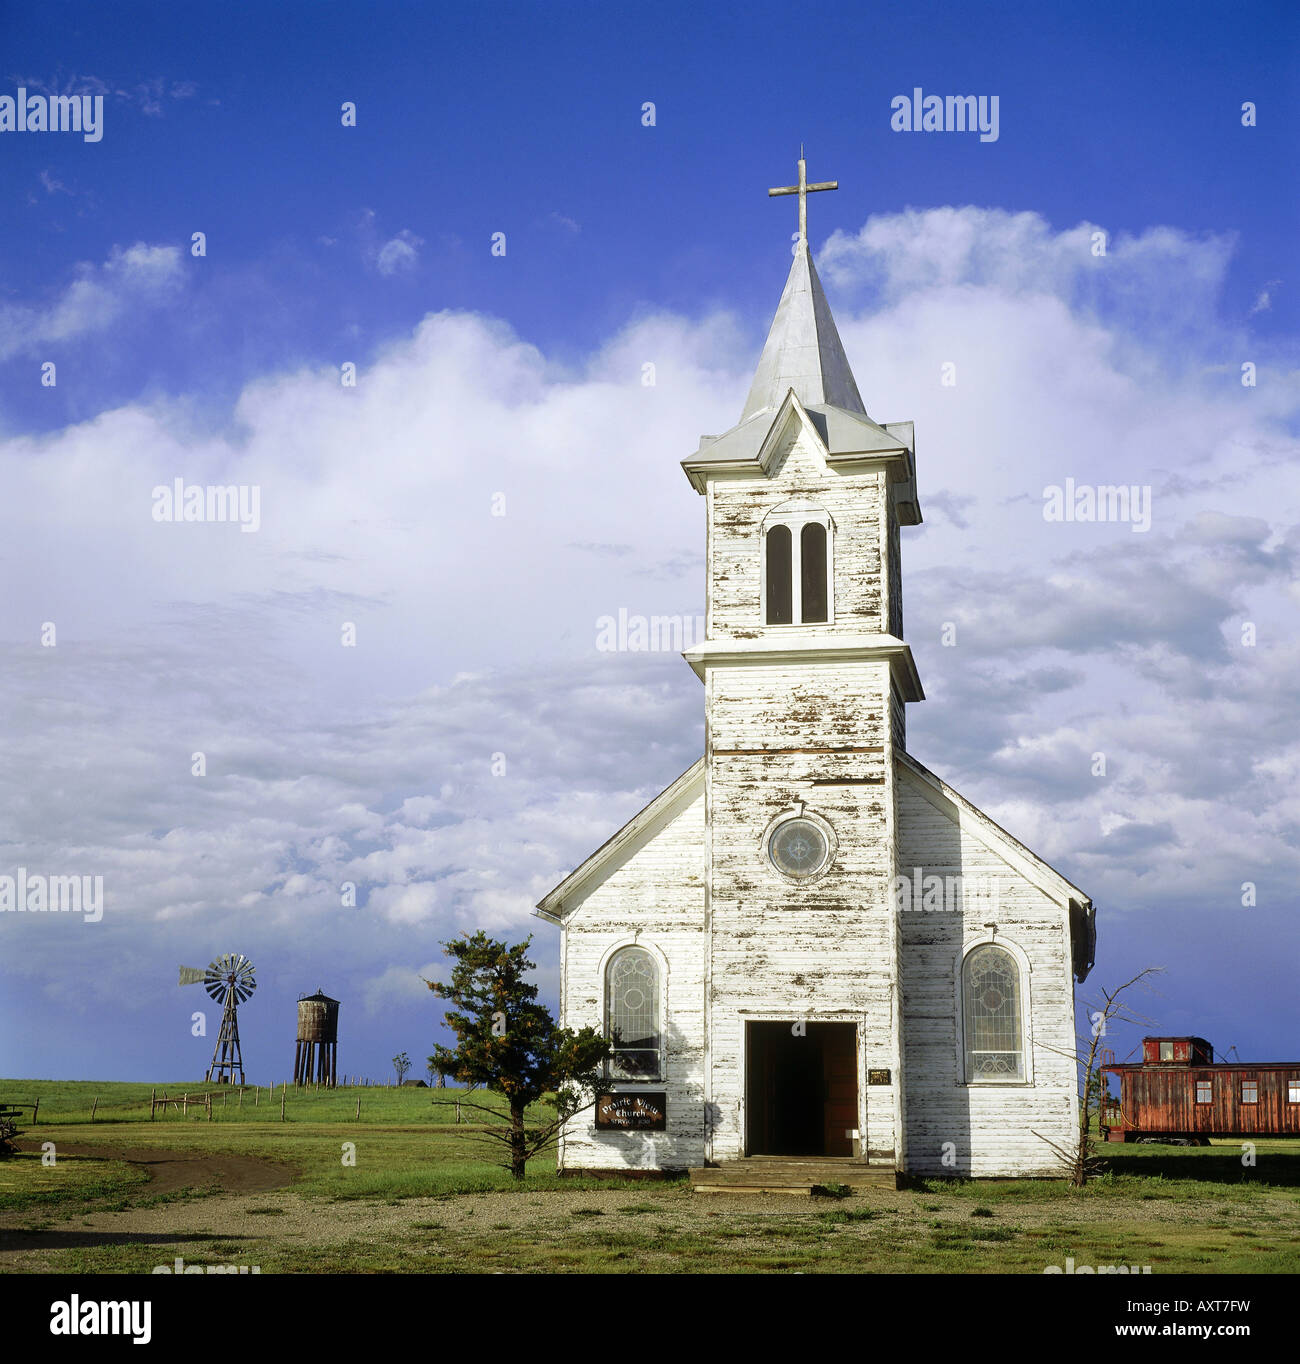 'geography / travel, USA, South Dakota, 1880 Town, western city of 1880 and setting for the film 'Dances with wolves',' Stock Photo